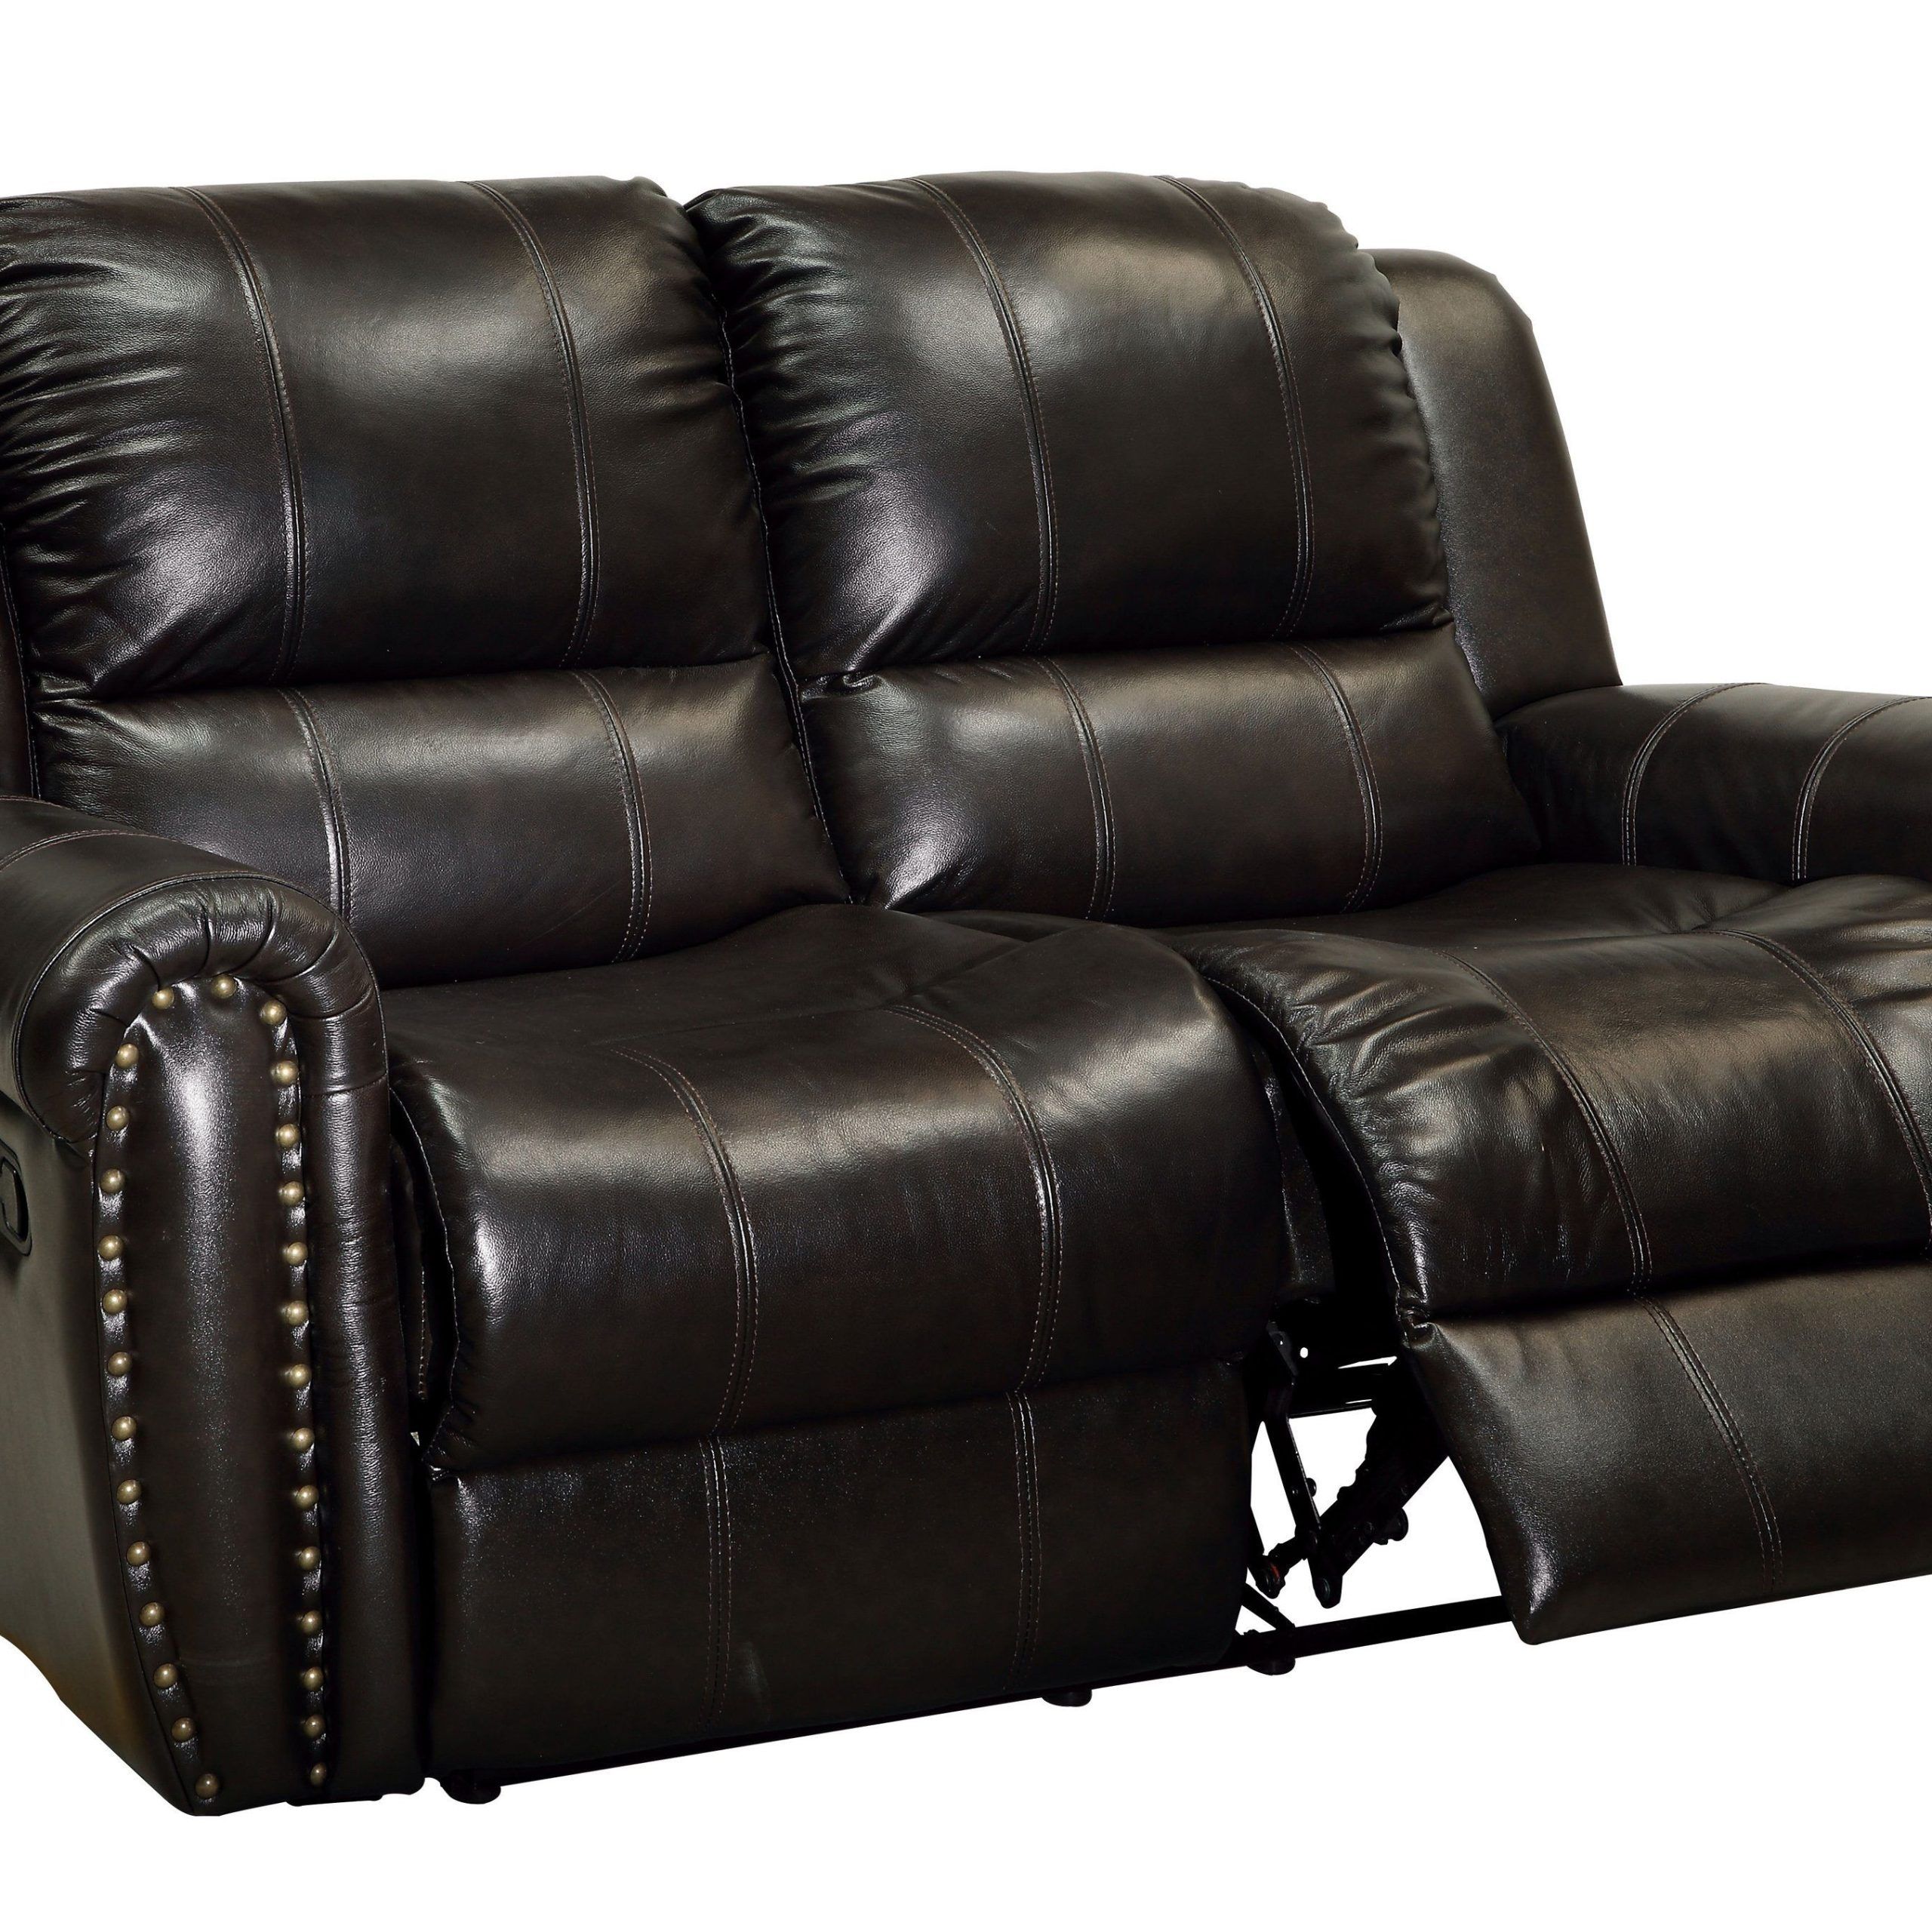 Hennigan Transitional Top Grain Leather Match Reclining Loveseat In For Top Grain Leather Loveseats (Gallery 12 of 20)